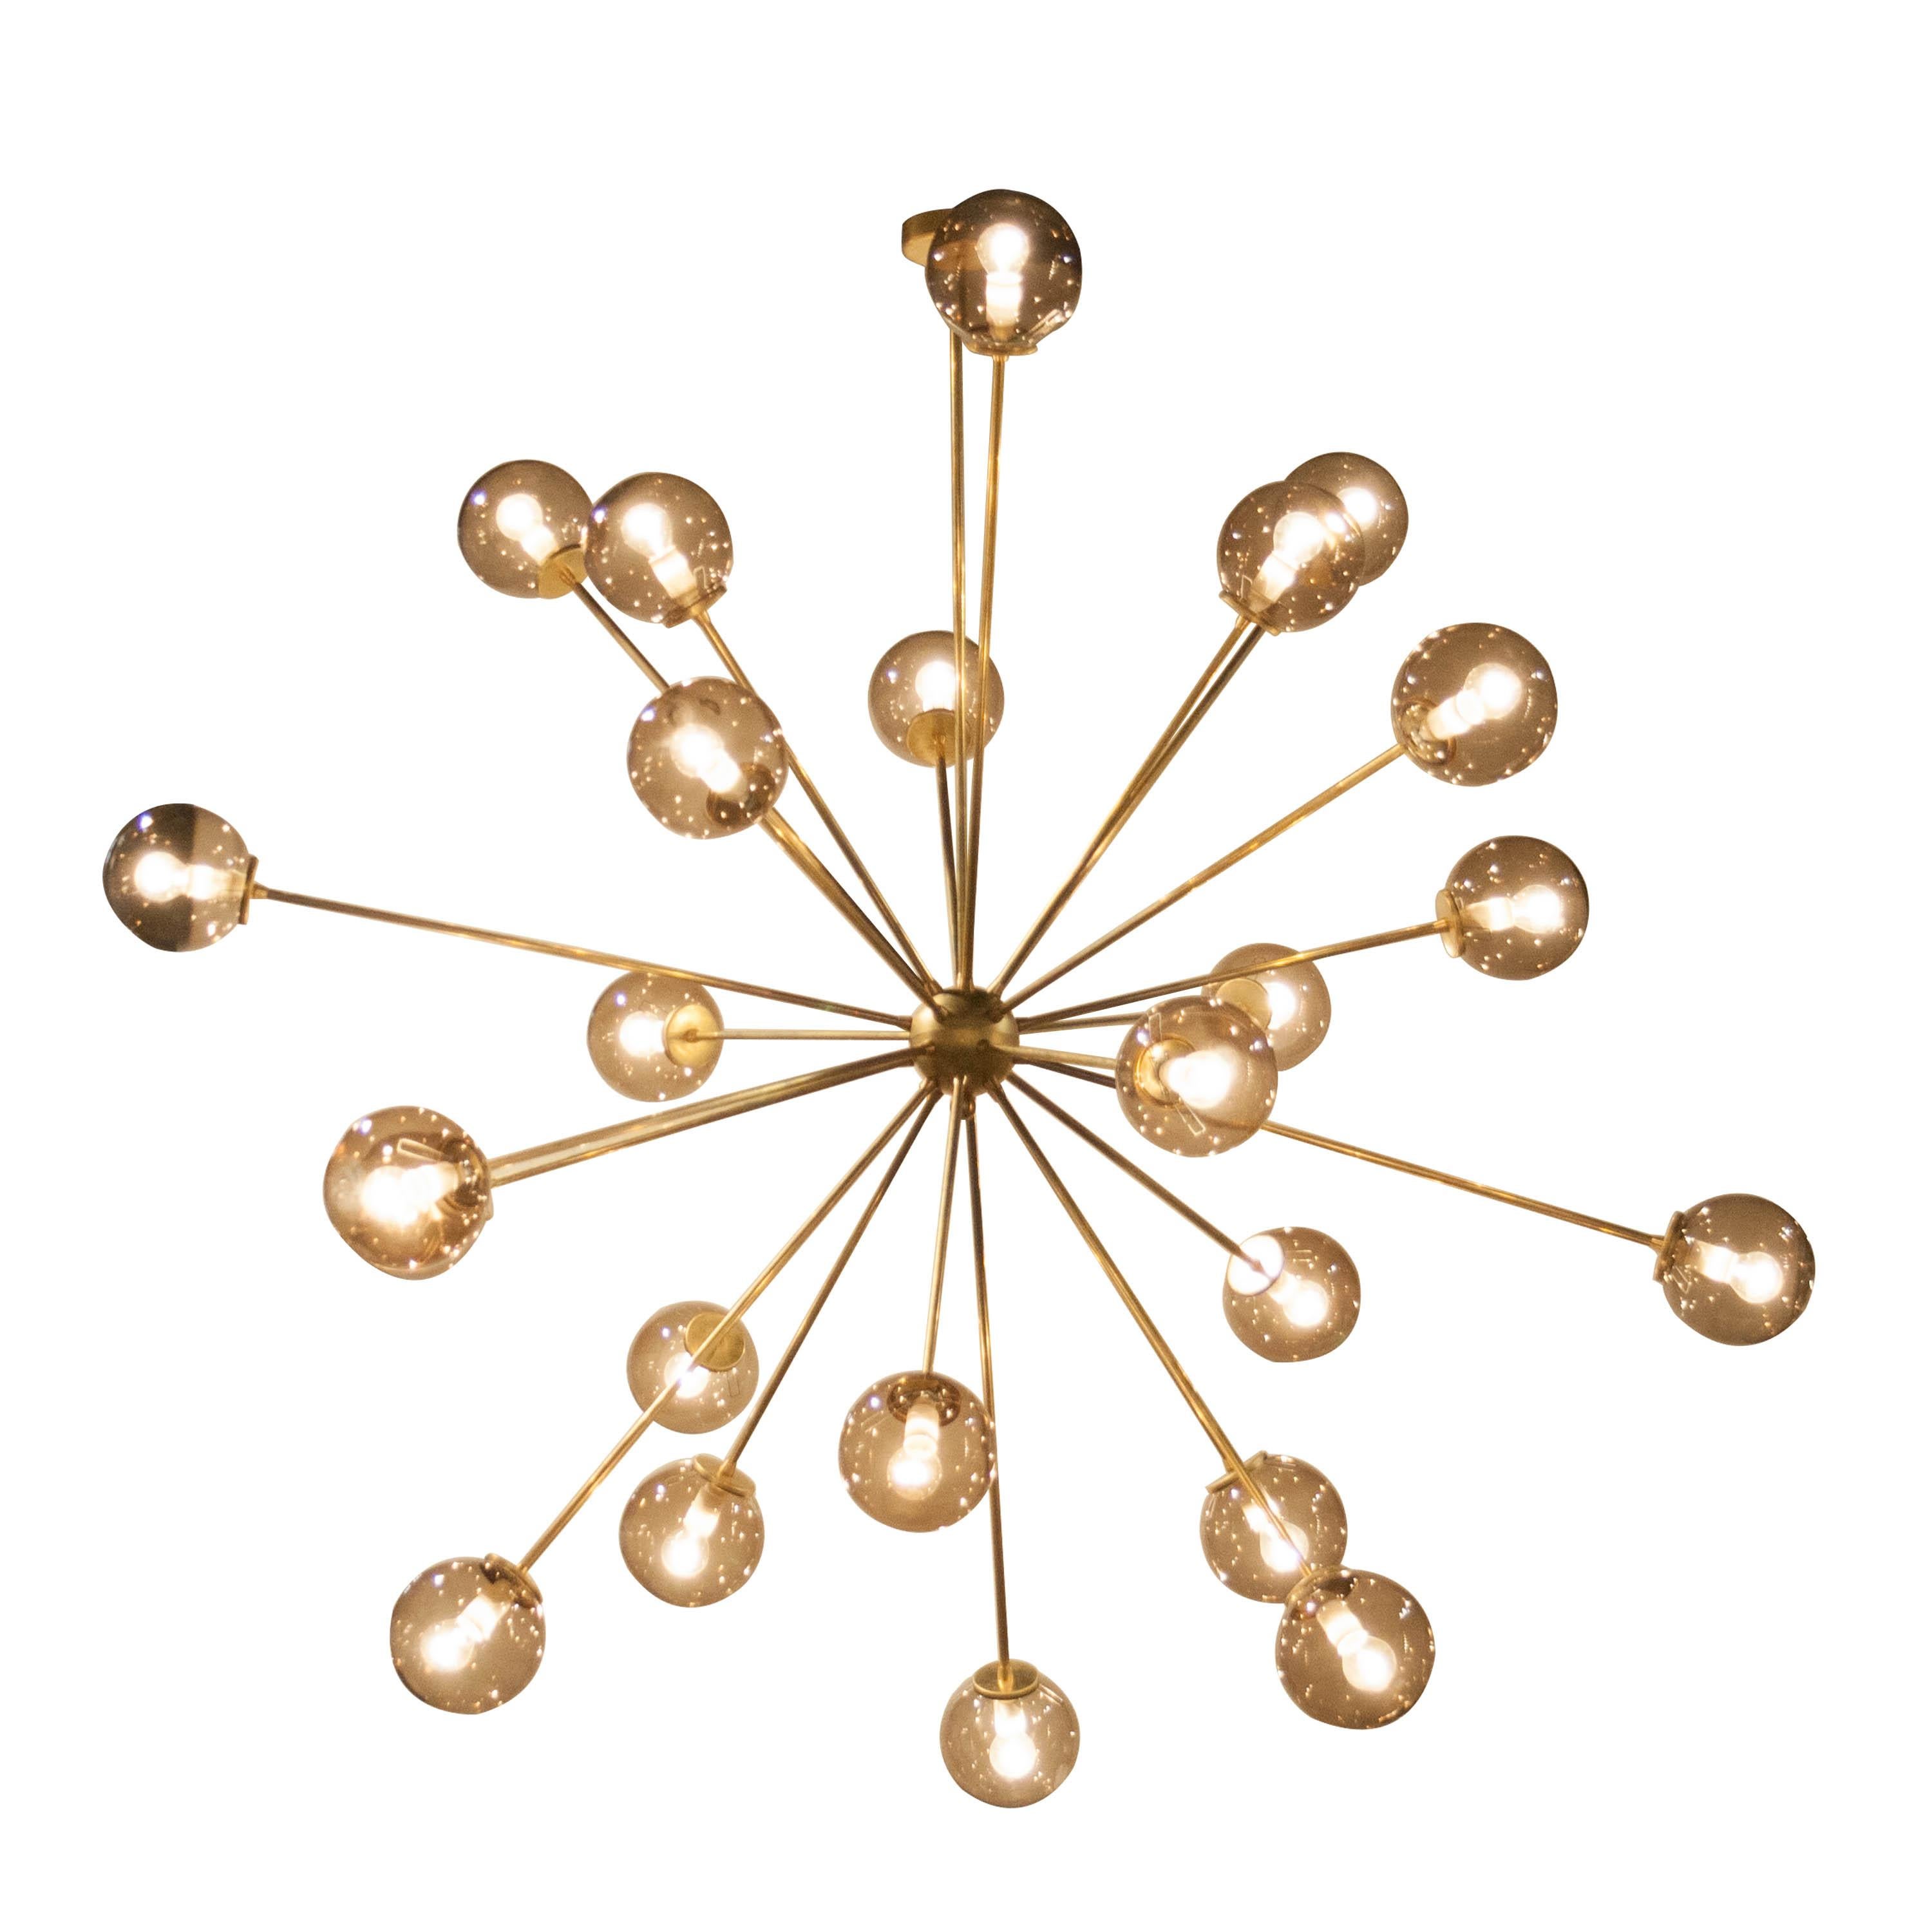 Contemporary suspension lamp, designed by IKB191, with brass structure, and 24 smoked glass tulips, Spain, 2020.
 